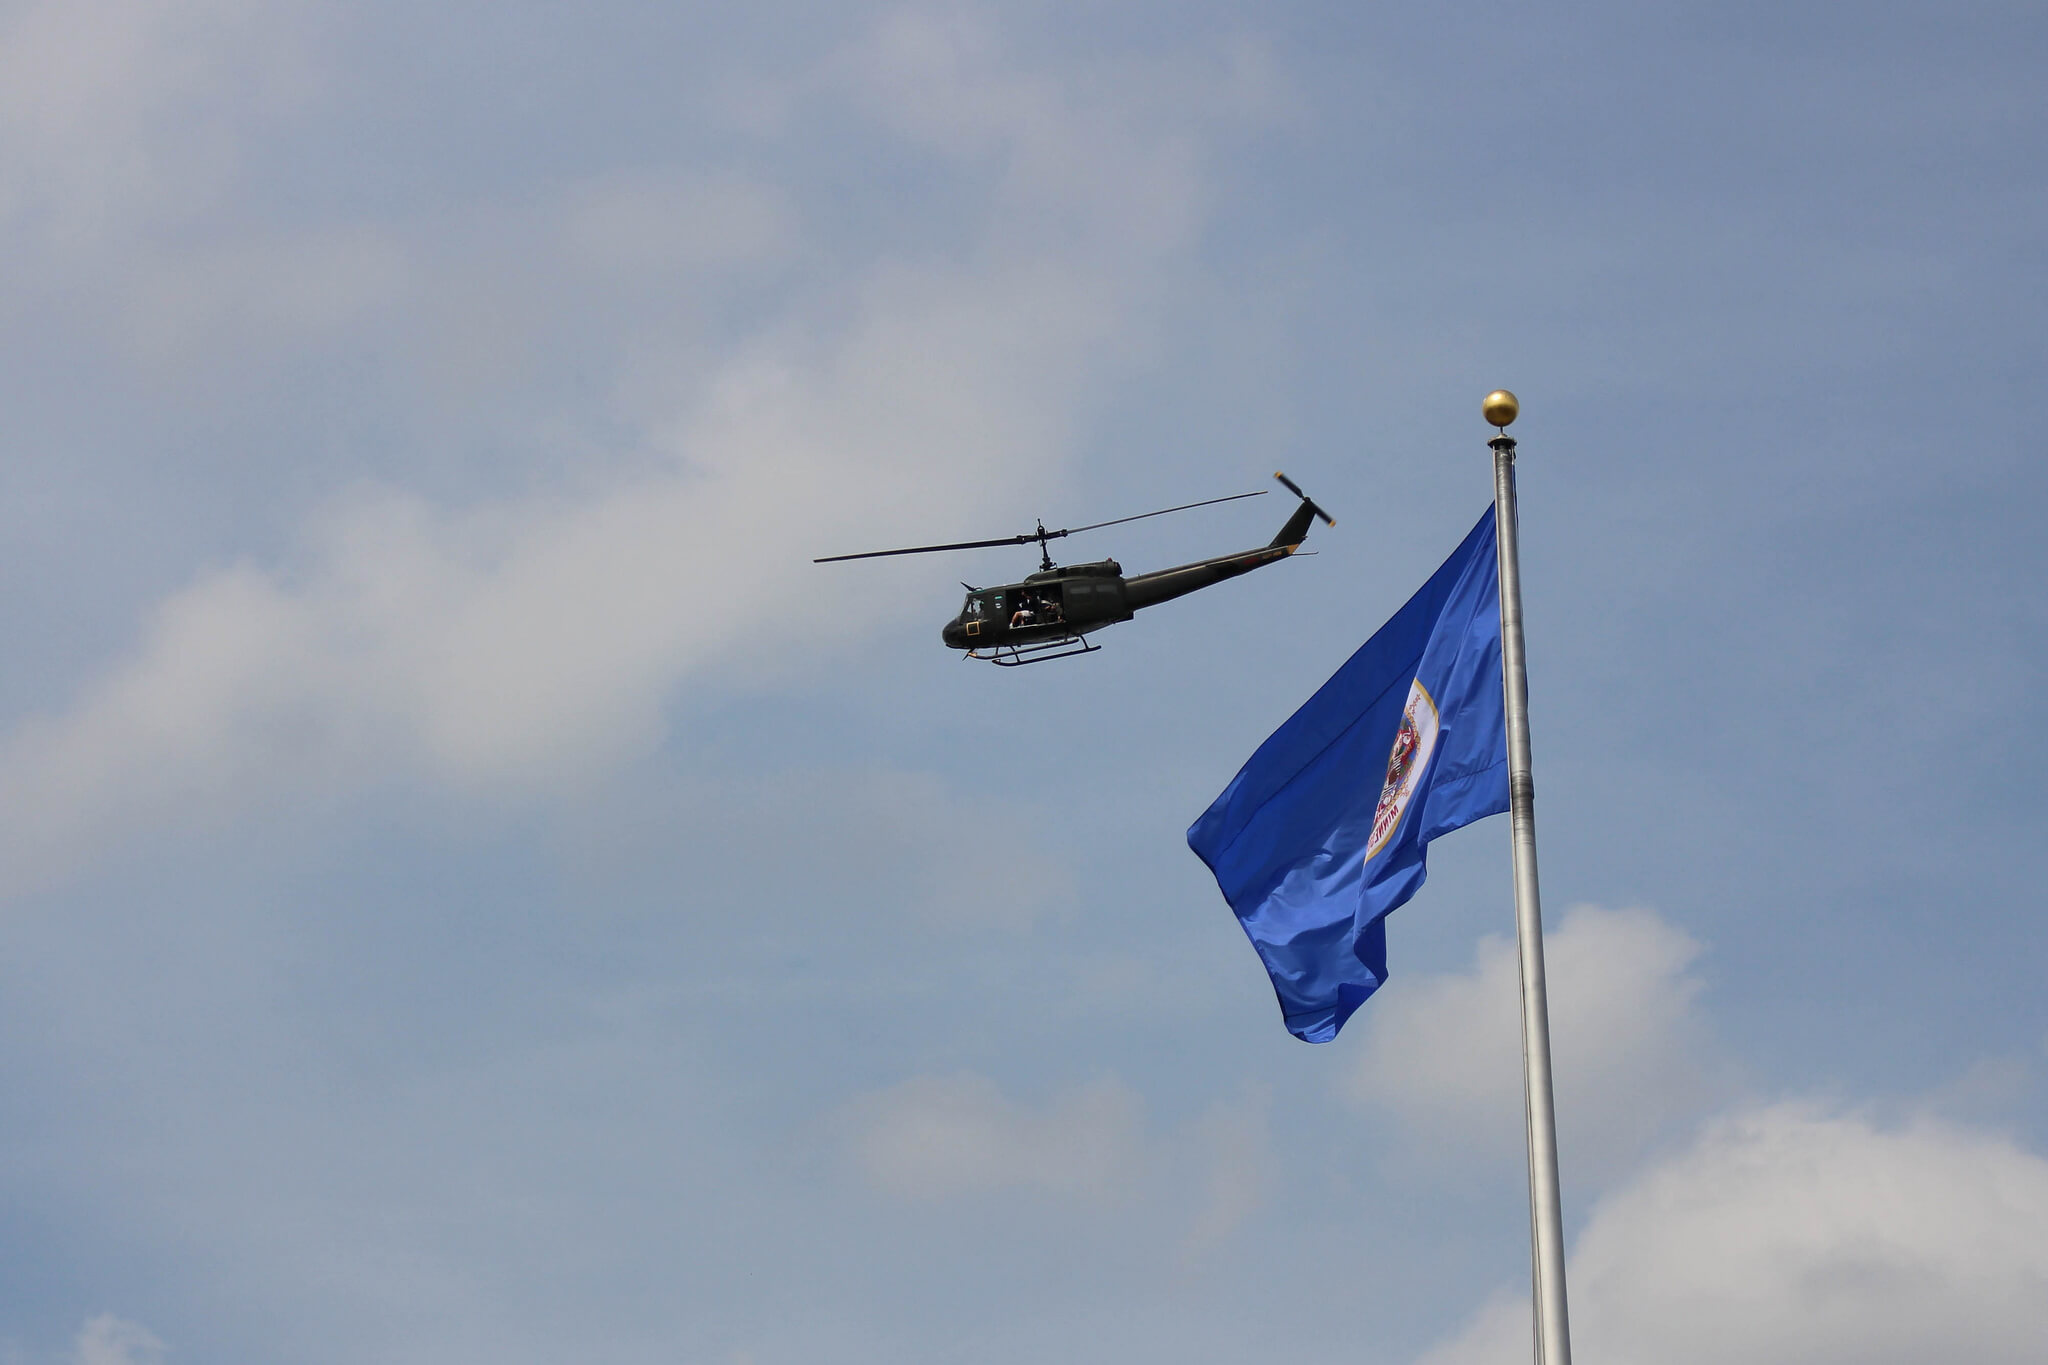 Huey Helicopter hovers over a blue flag at the Minnesota State Capitol.